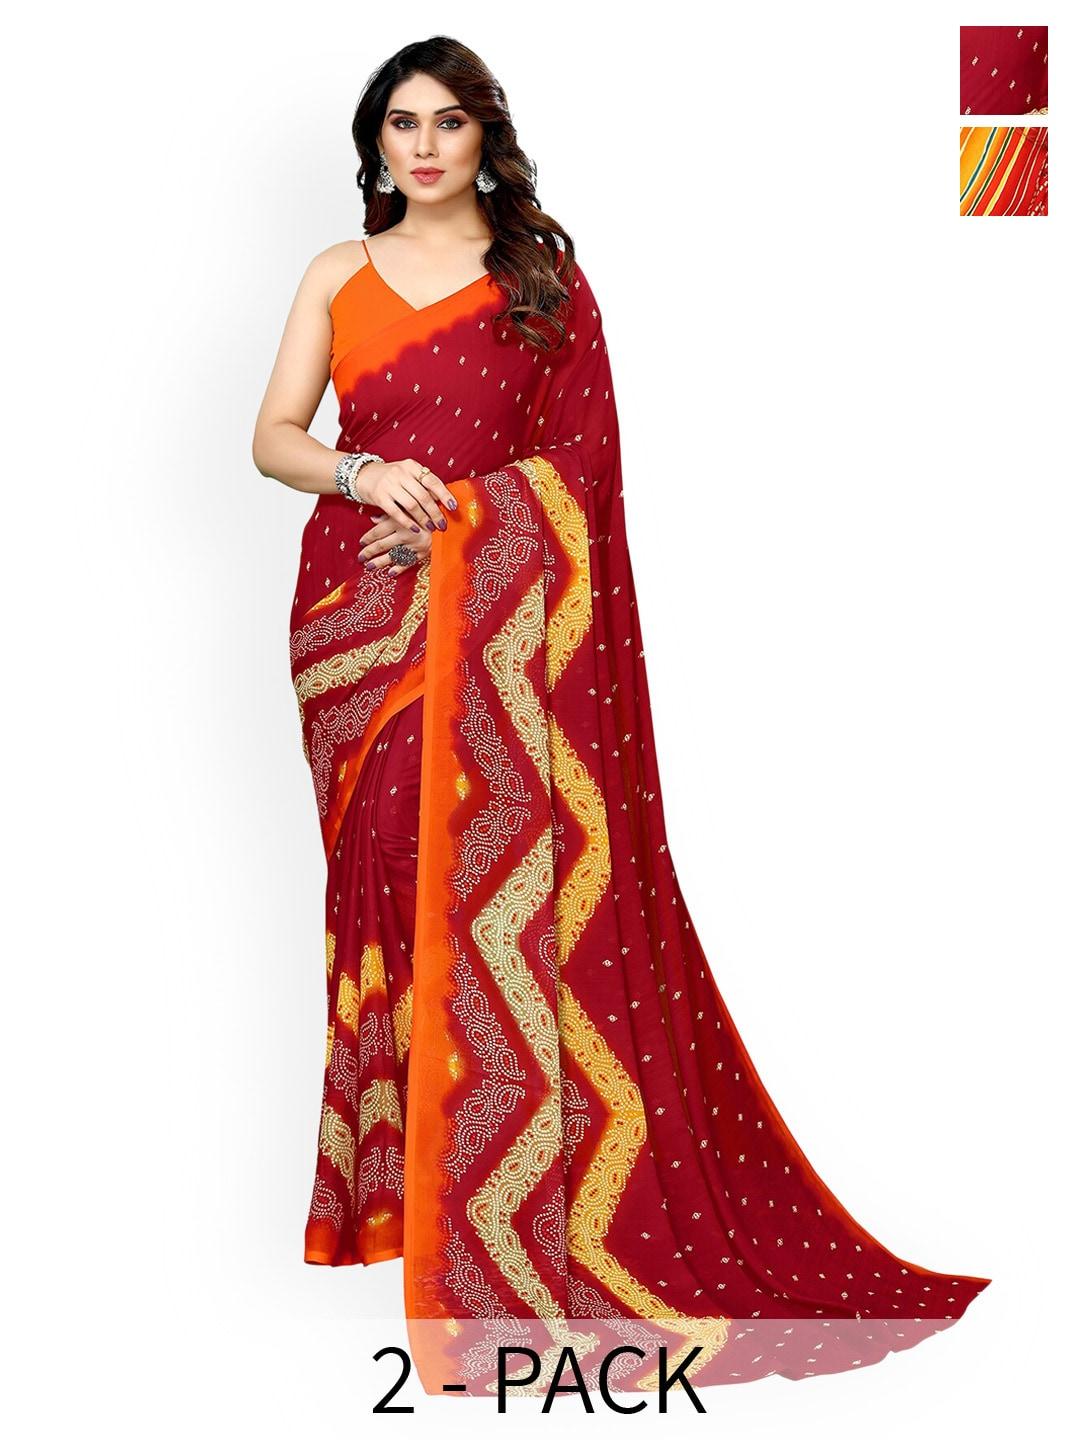 kalini-selection-of-2-printed-pure-georgette-sarees